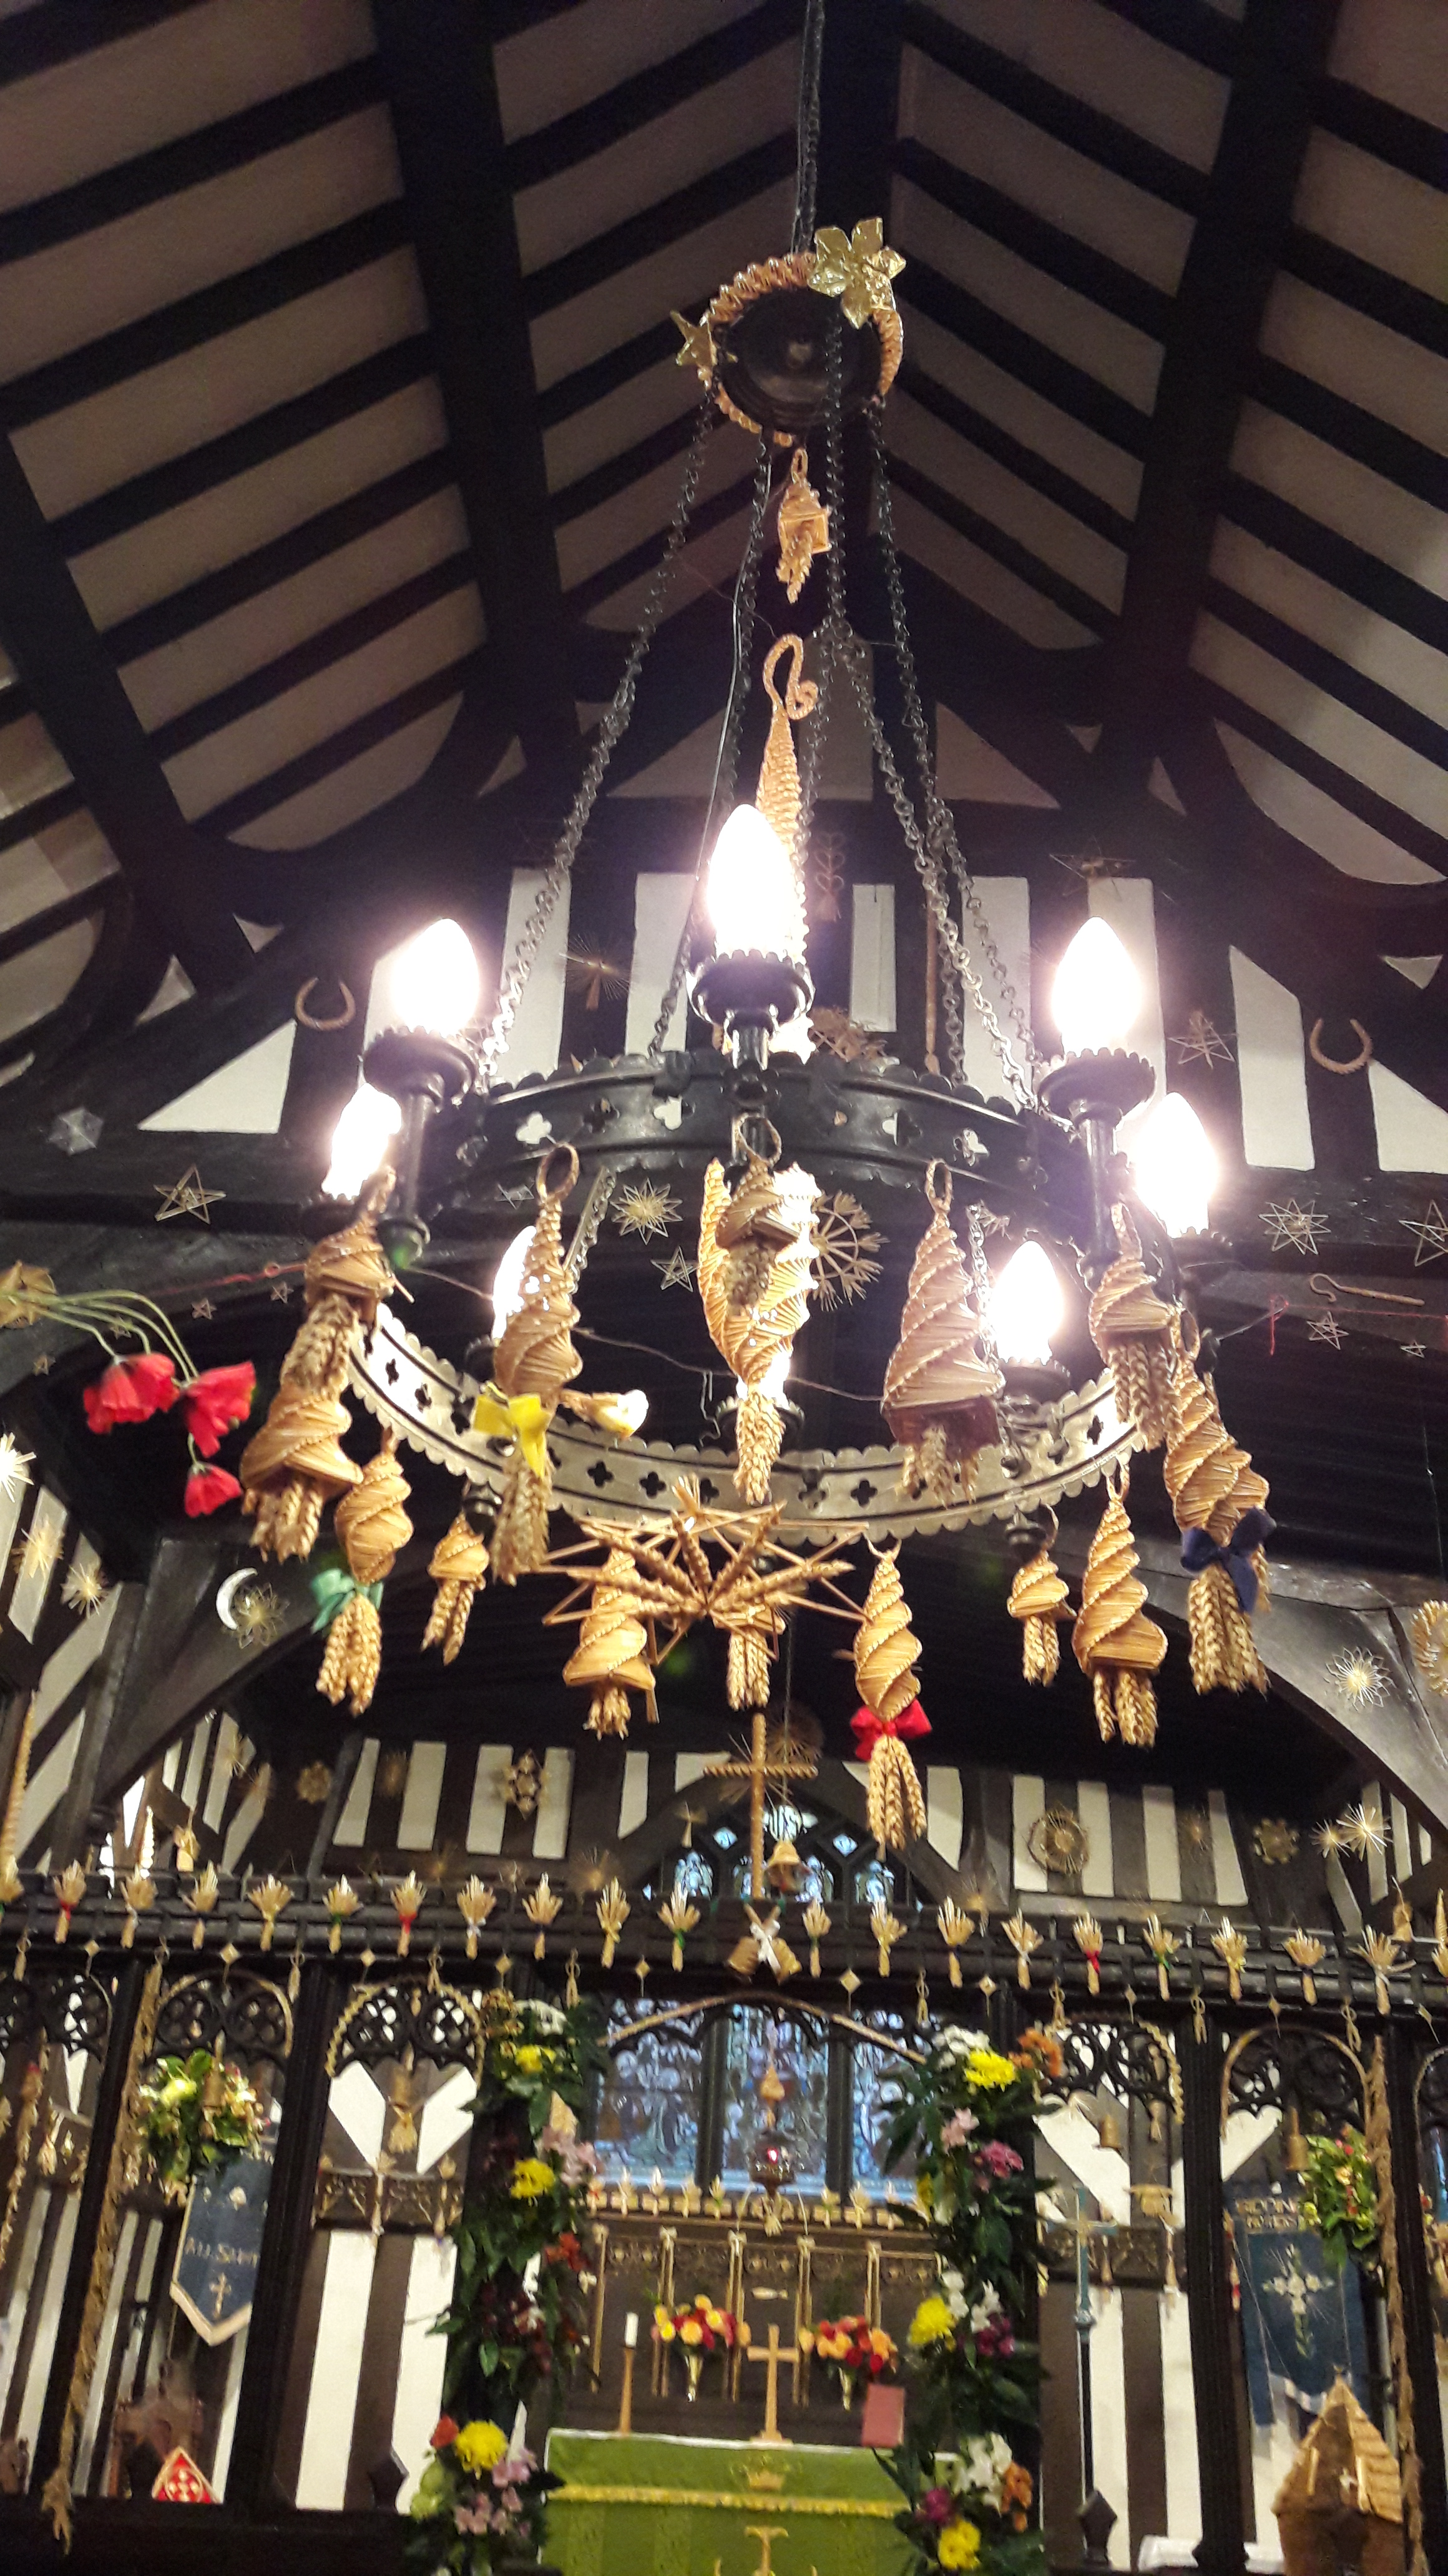 The chandelier at All Saints, Siddington decorated with corn dollies.